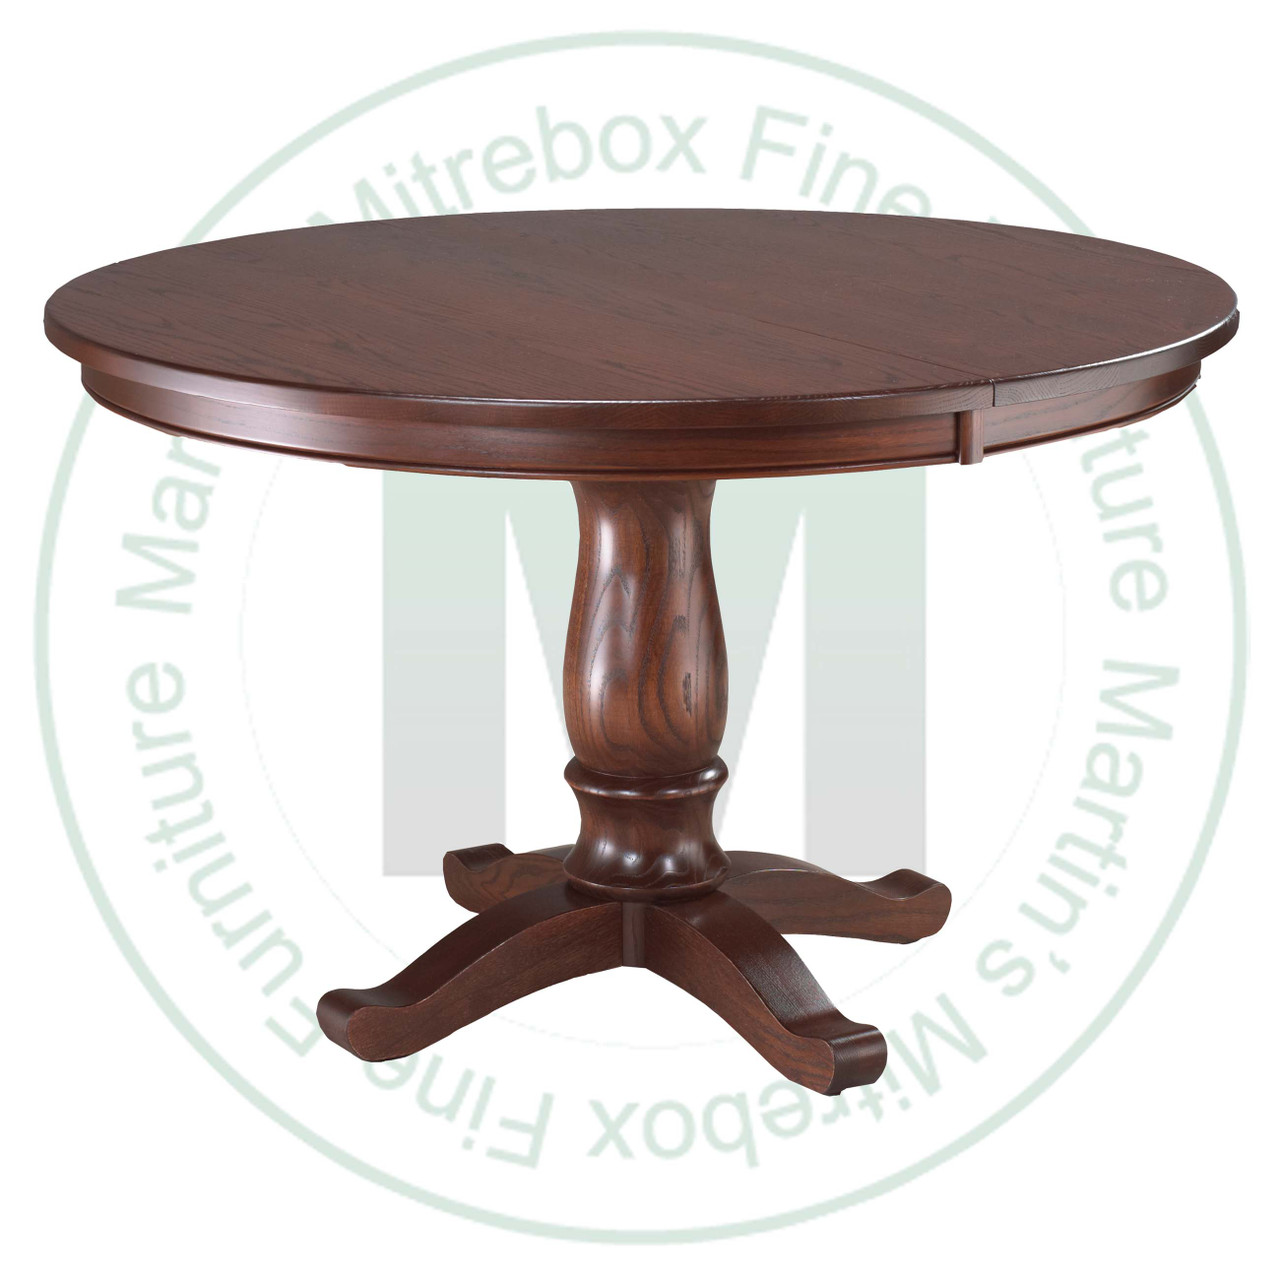 Wormy Maple Kimberly Crest Single Pedestal Table 42''D x 48''W x 30''H With 1 - 12'' Leaf Table